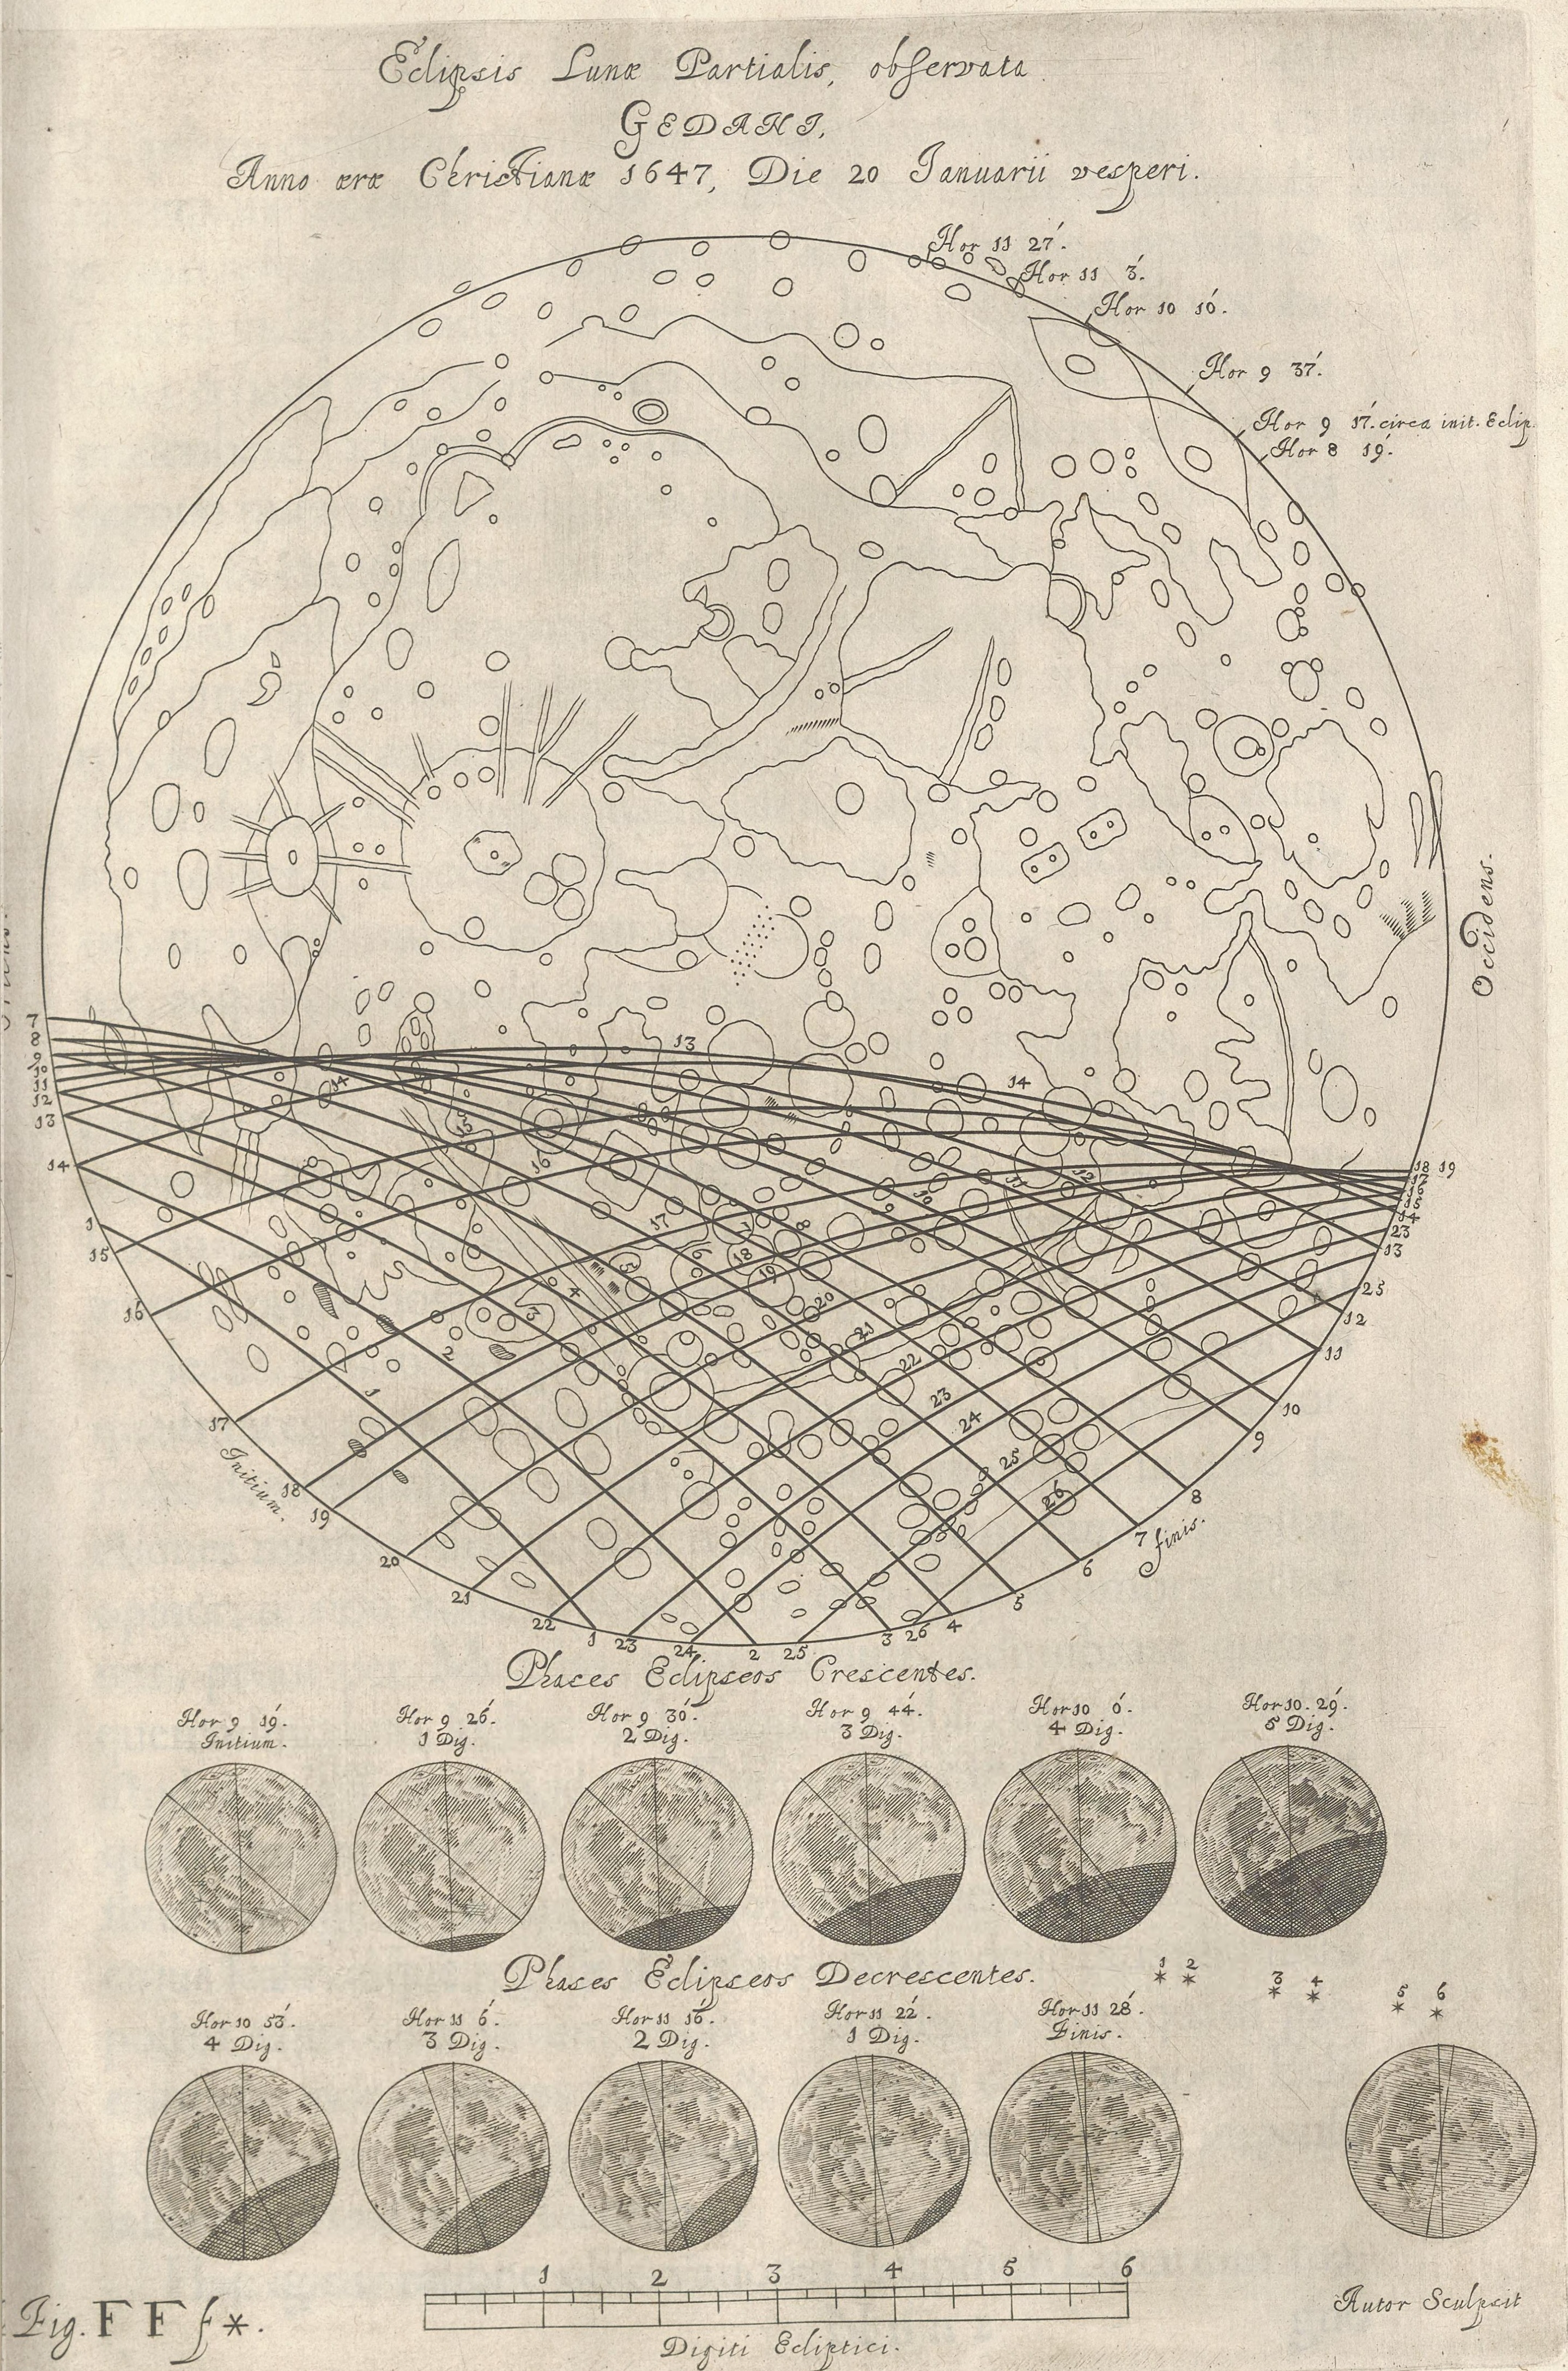 a large sketch of the moon on the top of the page with several smaller sketches of the moon in different phases, in two rows